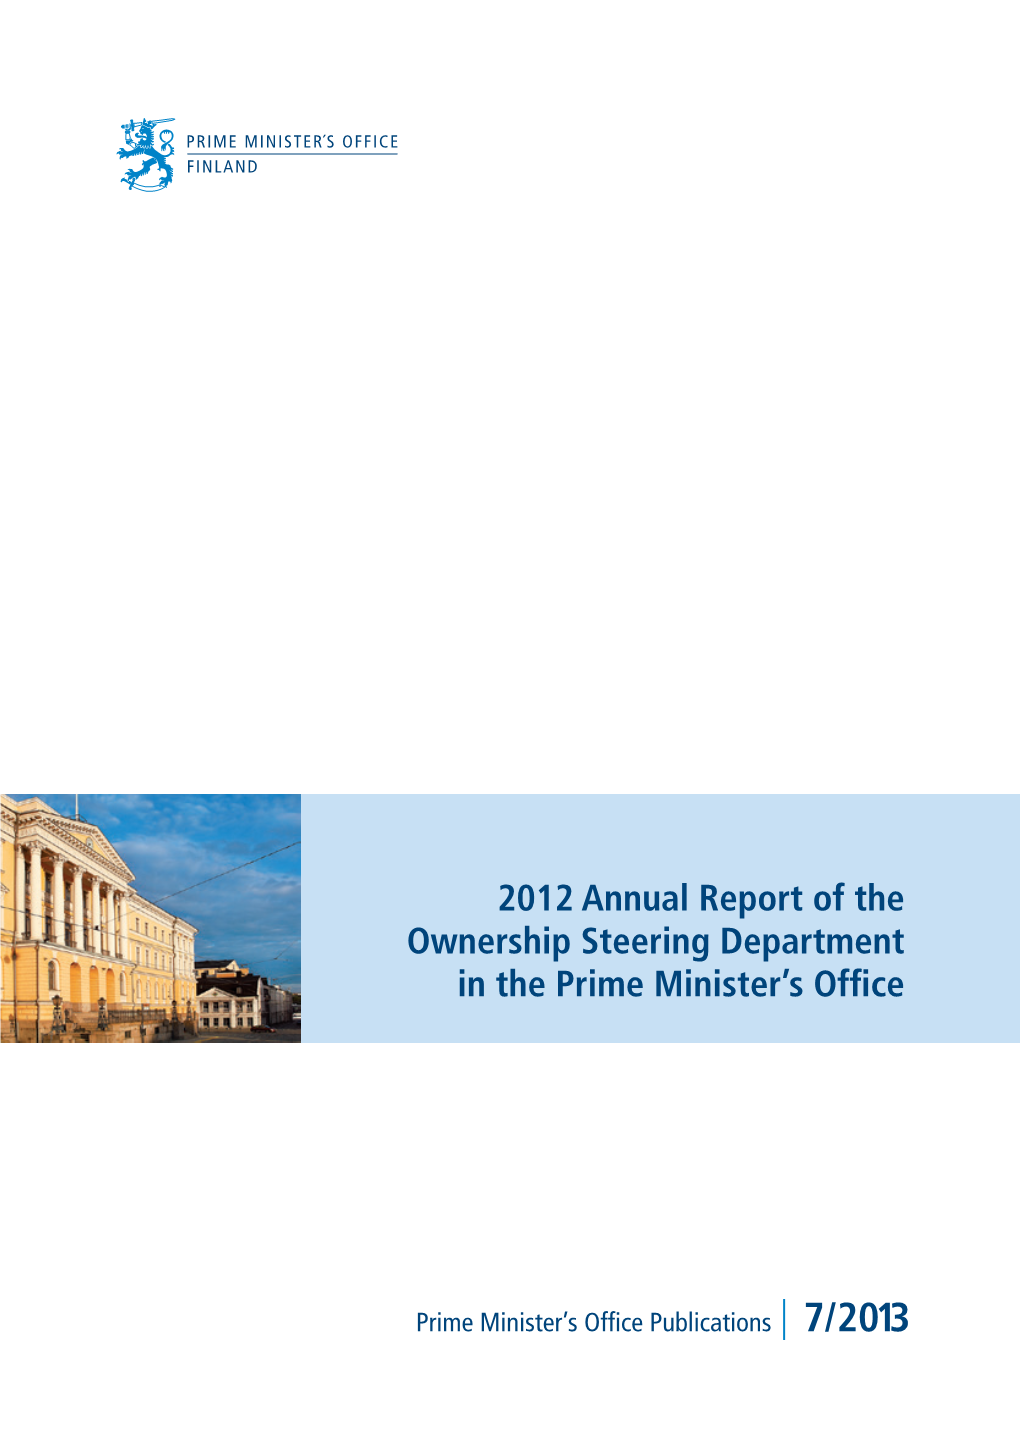 2012 Annual Report of the Ownership Steering Department in the Prime Minister’S Office